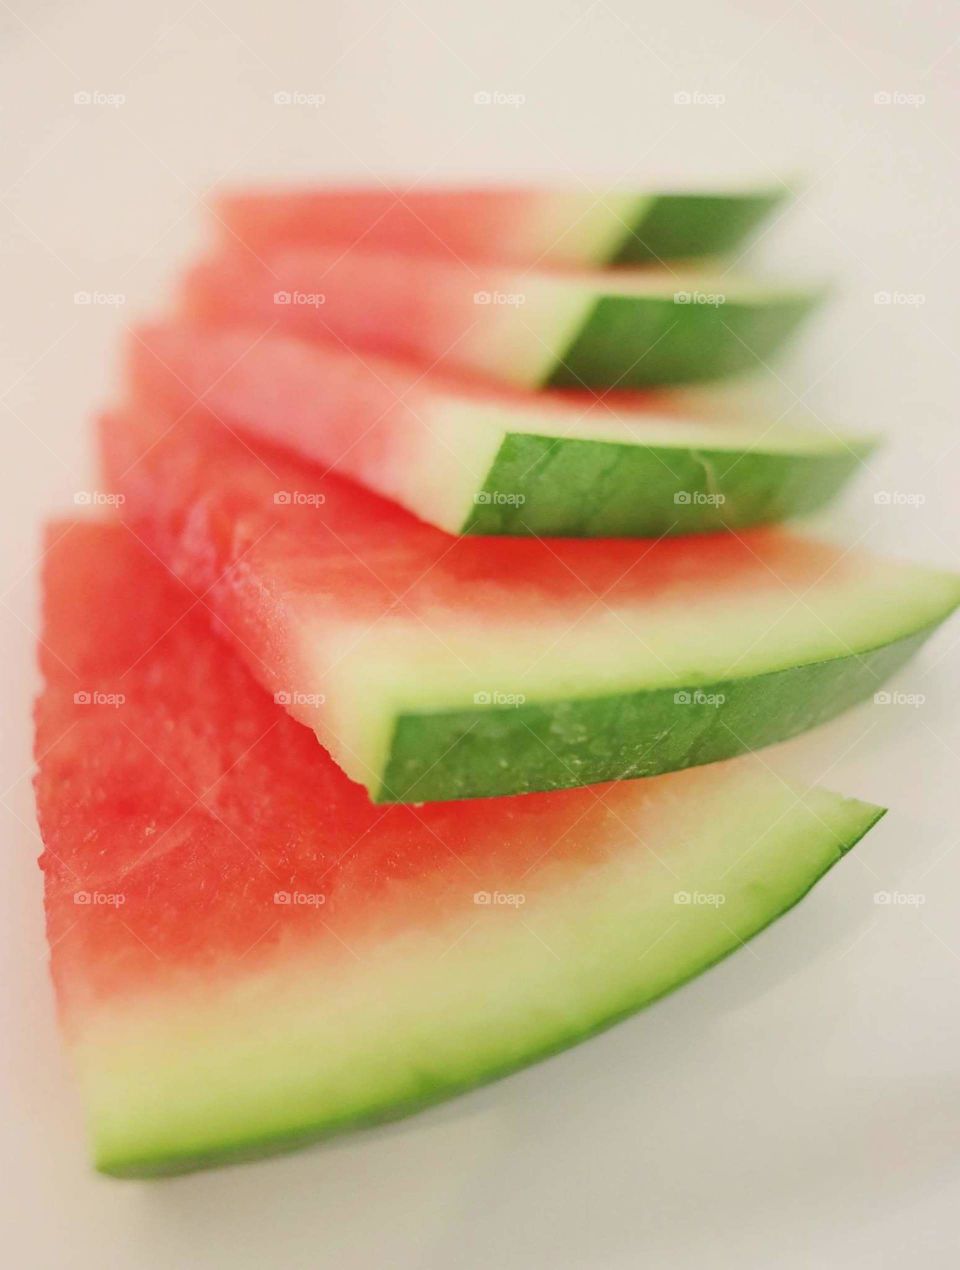 life is like a watermelon -Sweet-but you have to spit out the seeds.